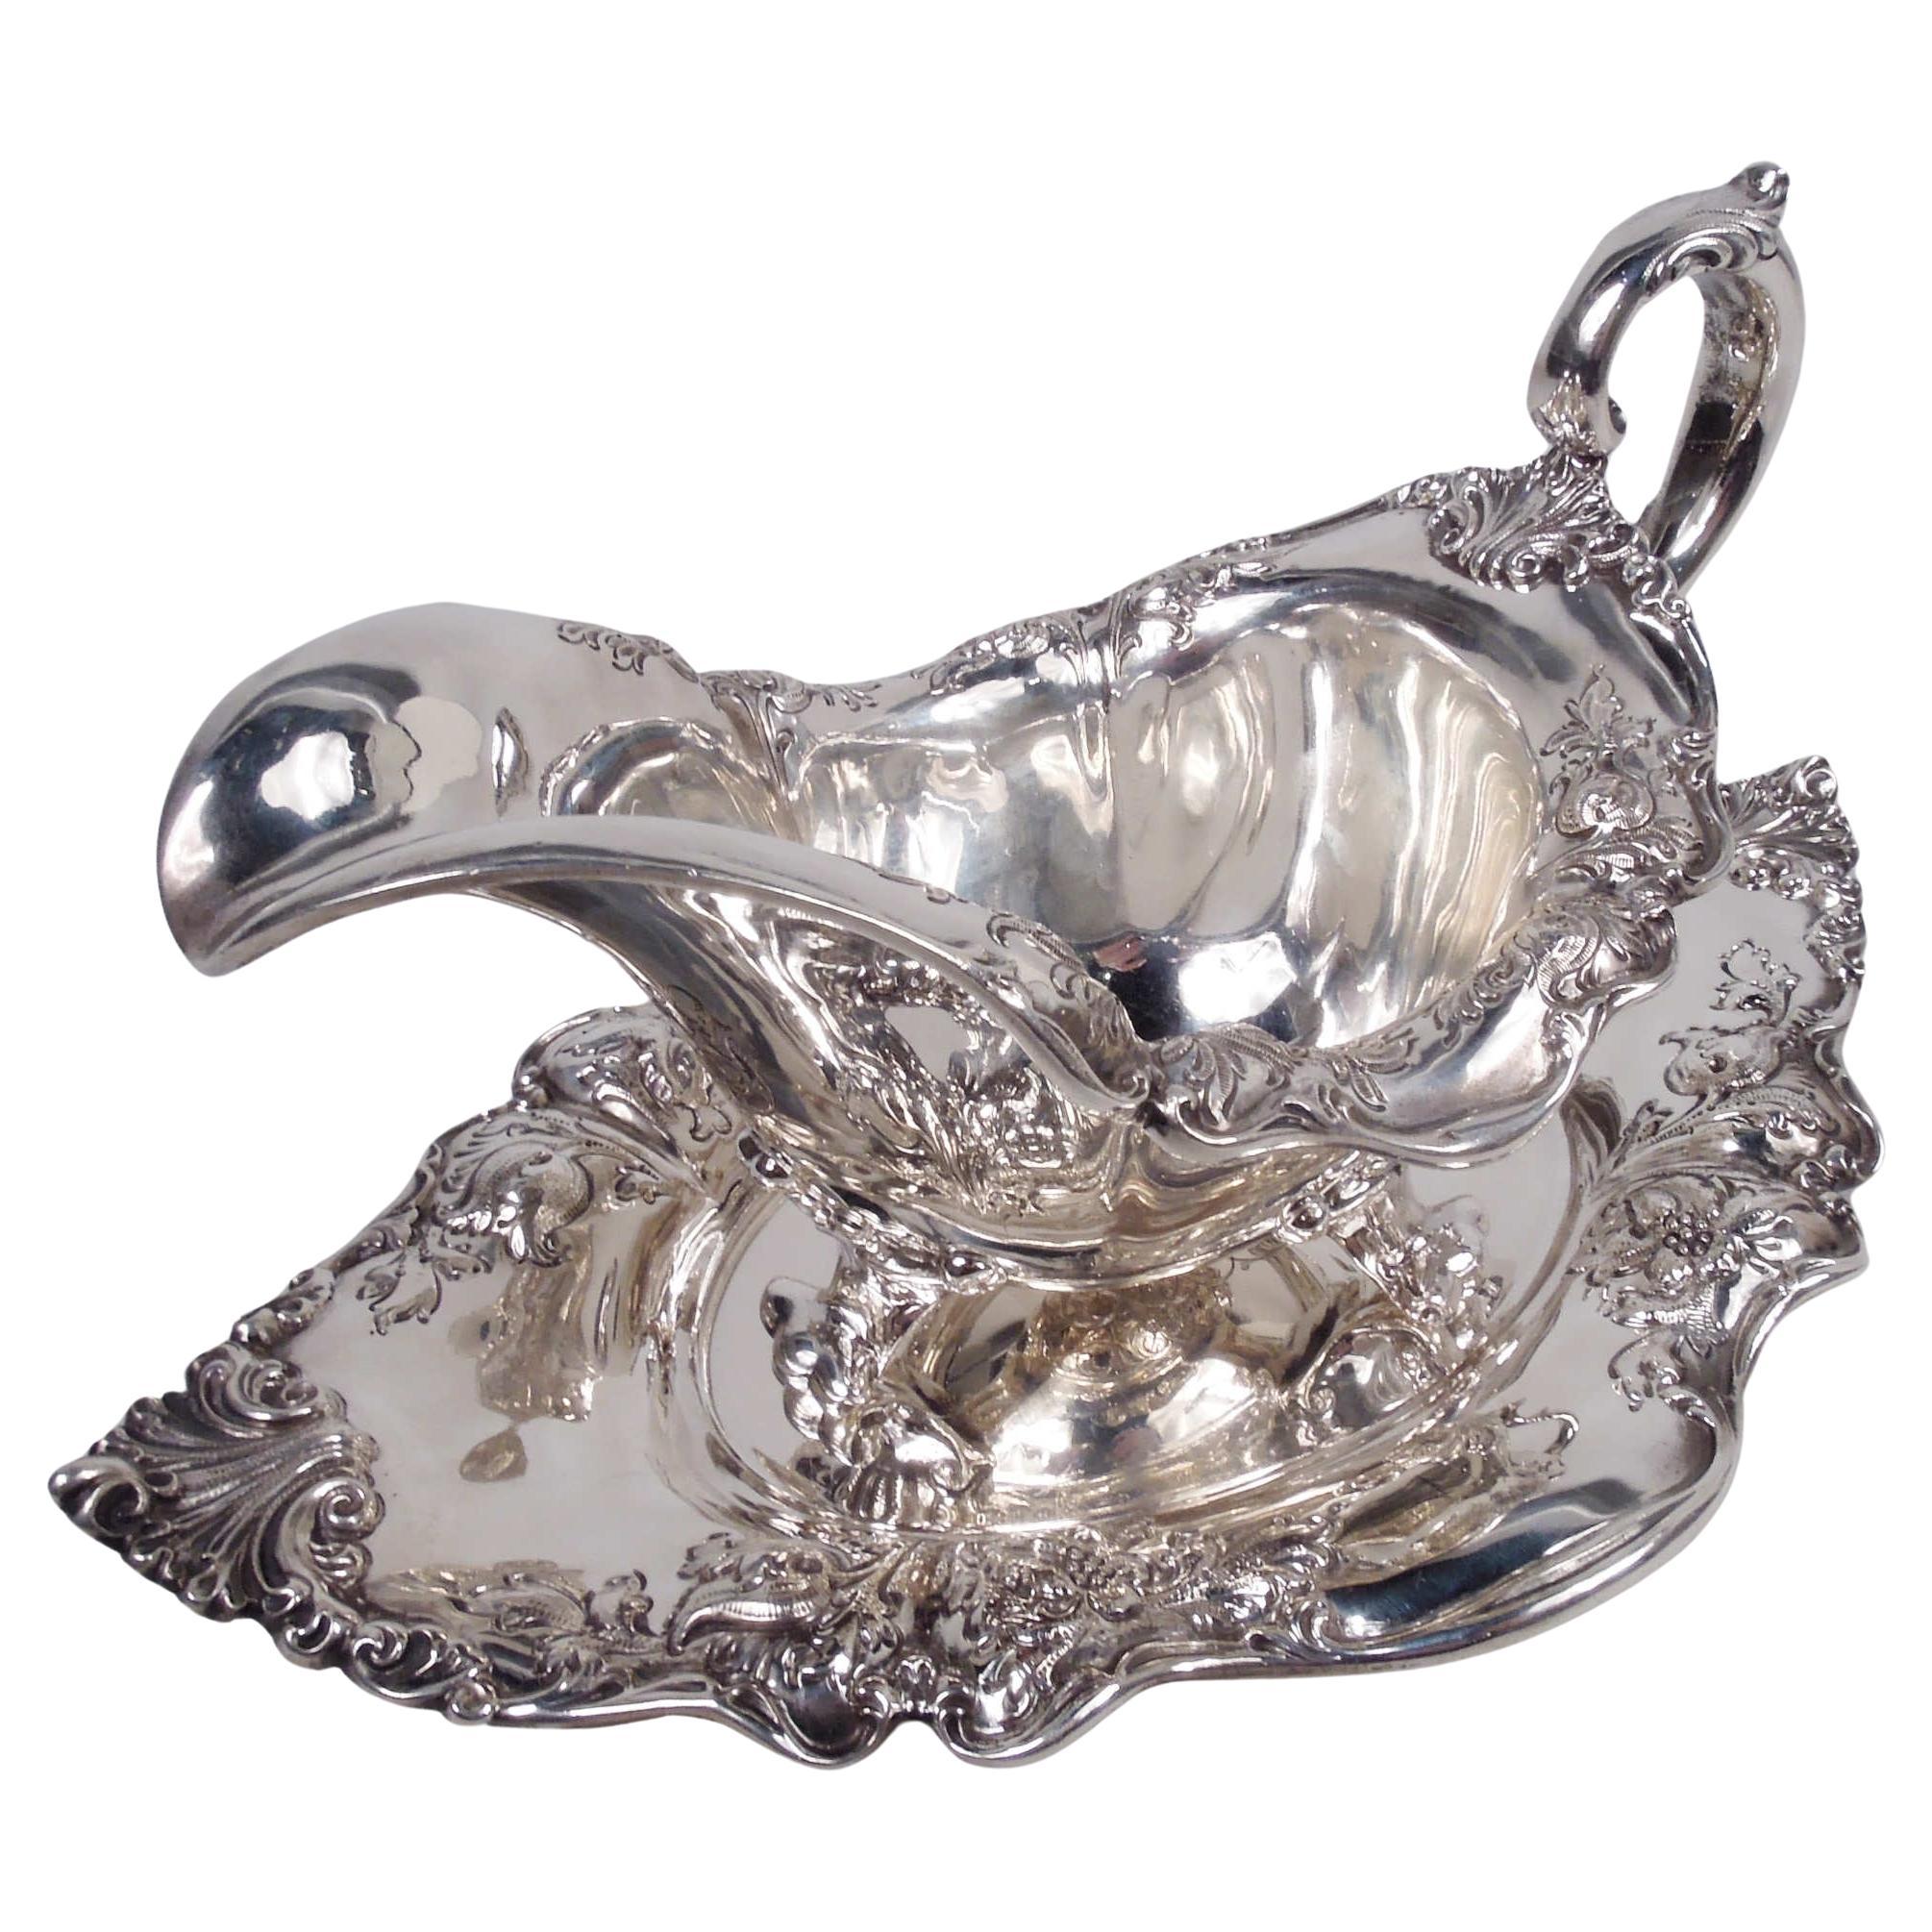 Antique Dominick & Haff Edwardian Sterling Silver Gravy Boat on Stand For Sale